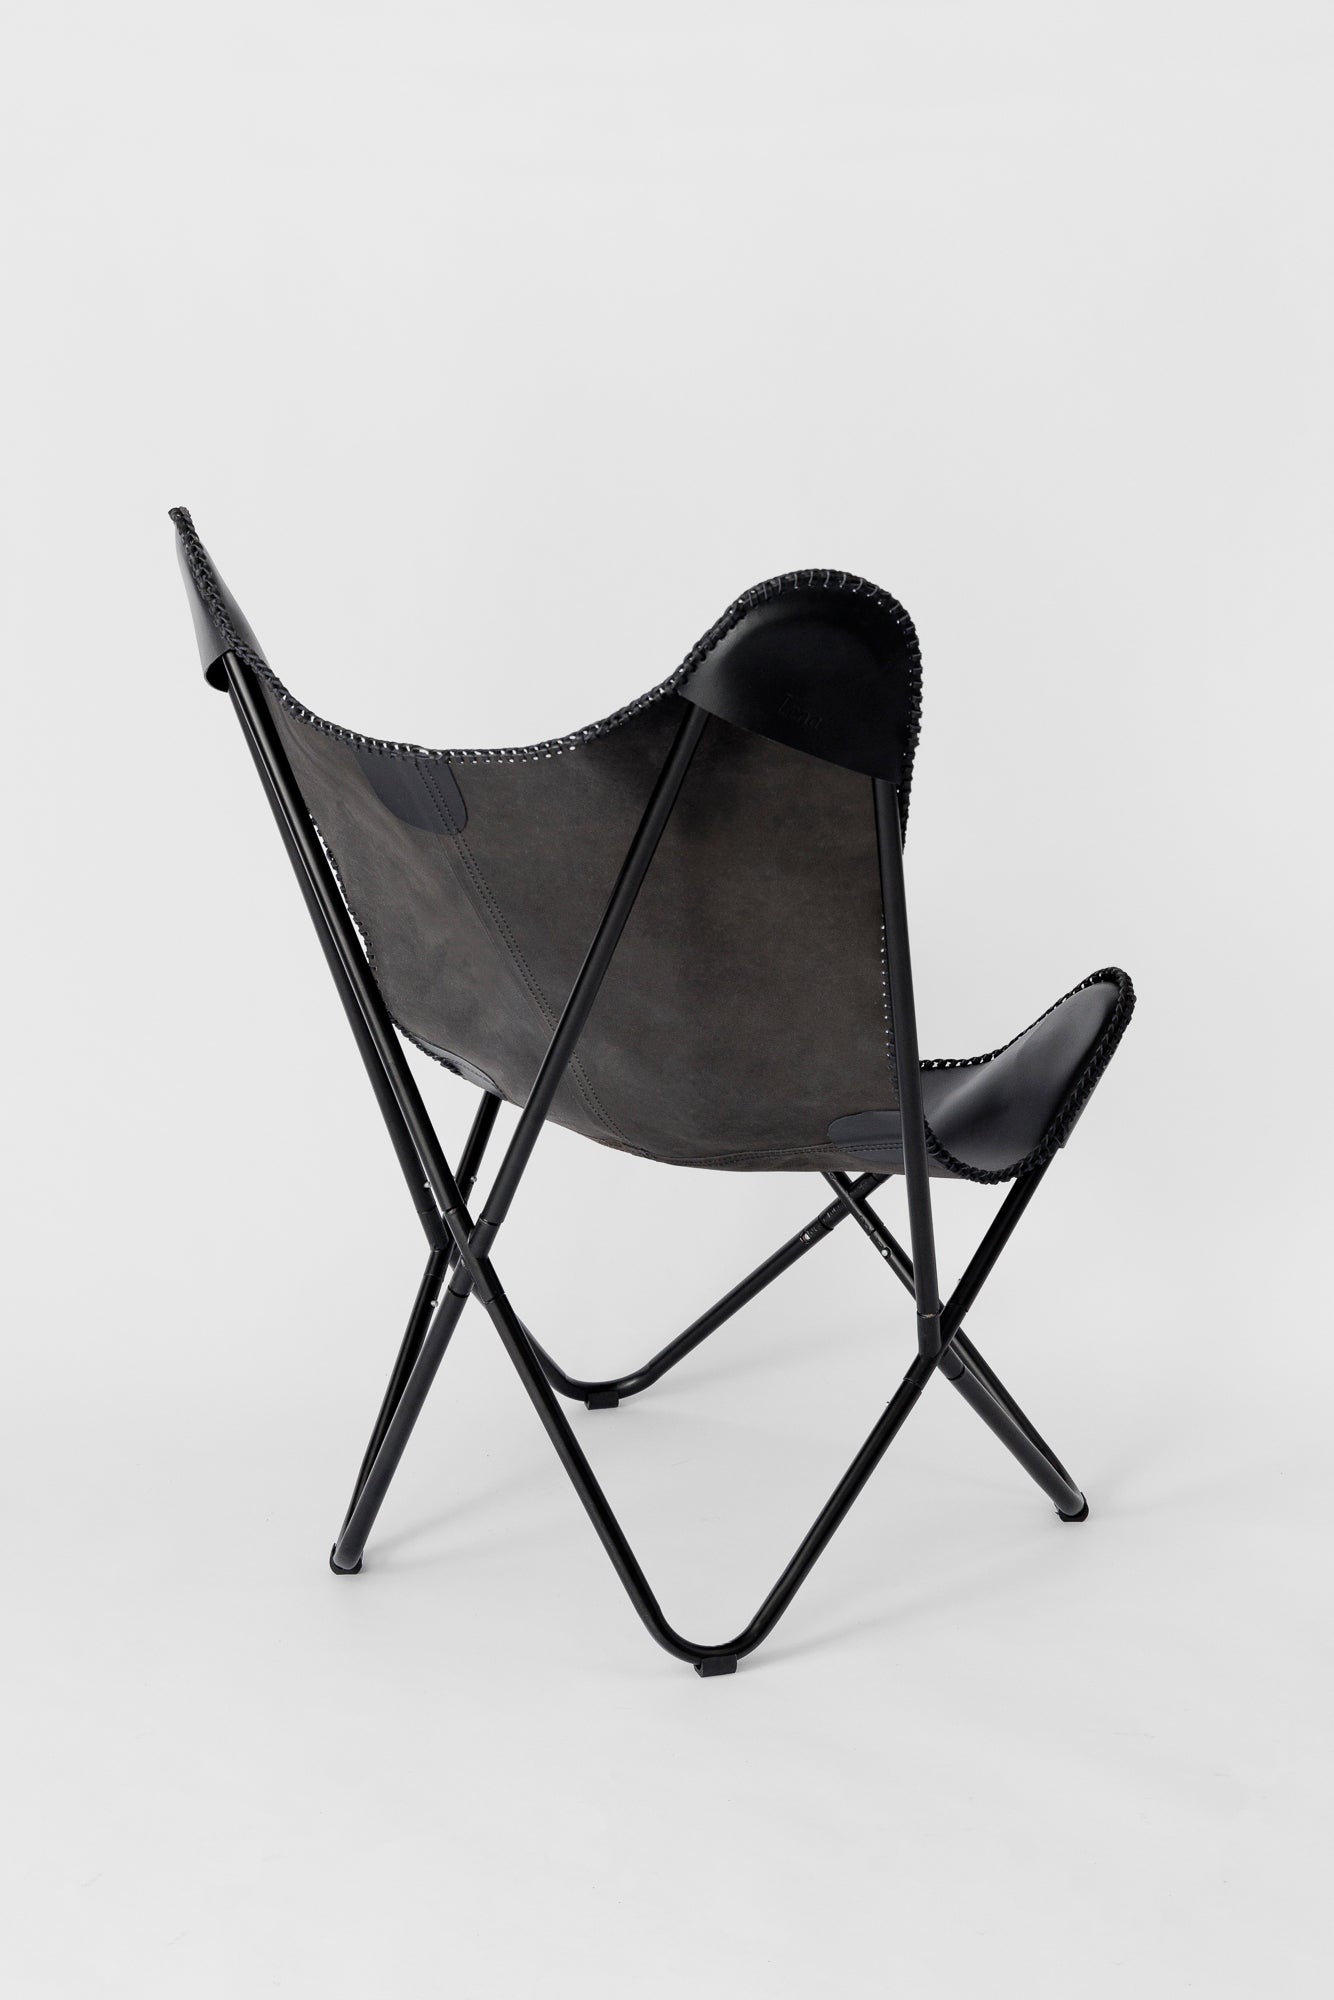 Lena Chair- Black Leather - Butterfly Chair